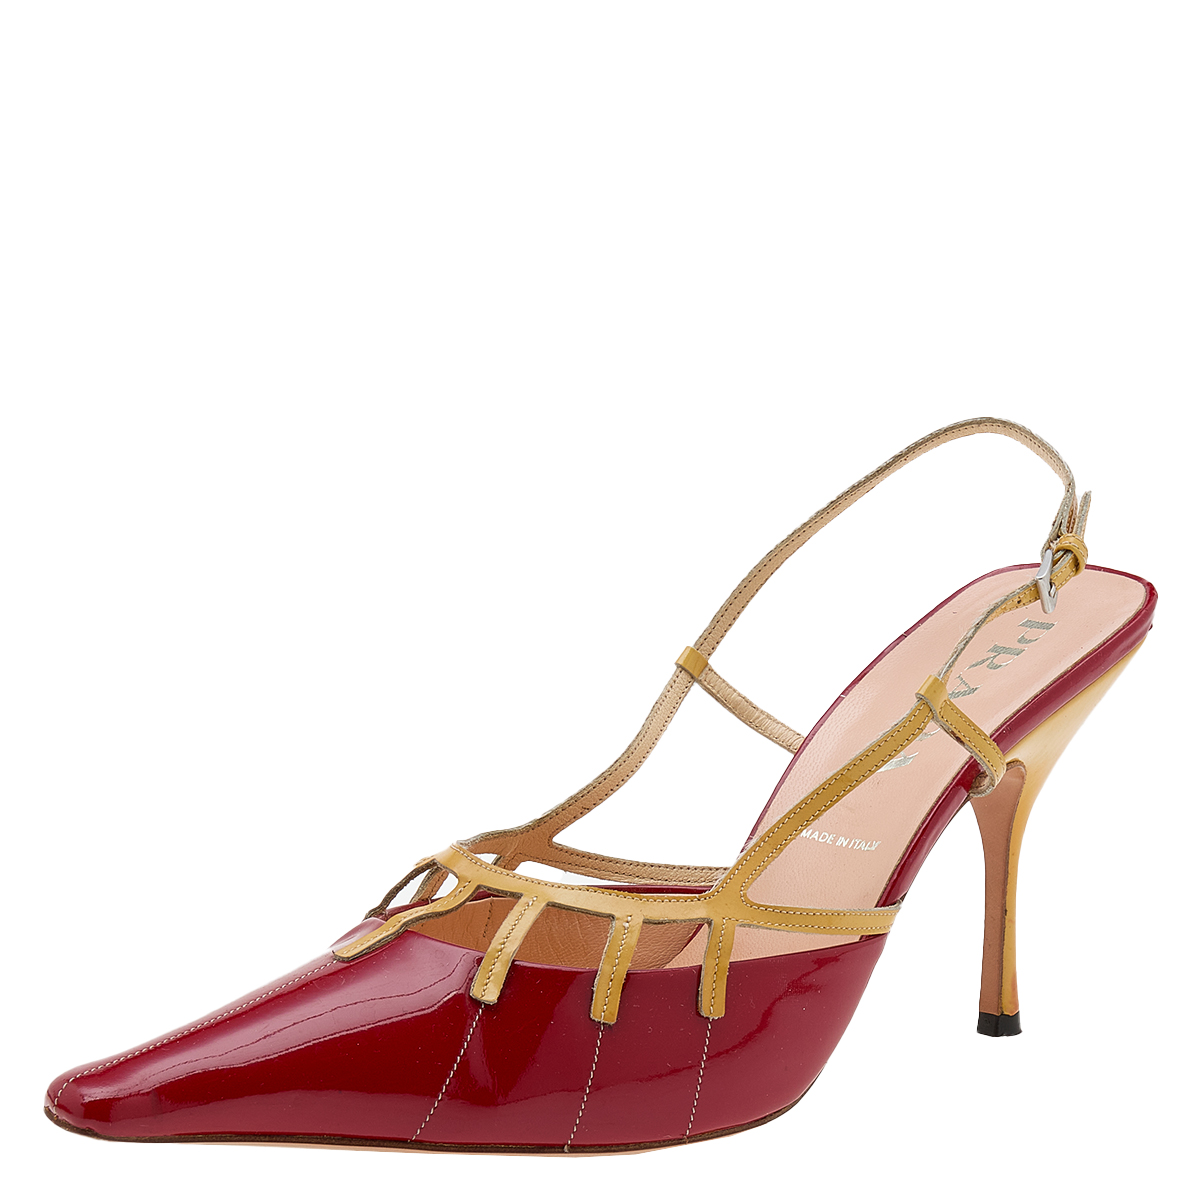 

Prada Red/Yellow Patent Leather Slingback Sandals Size